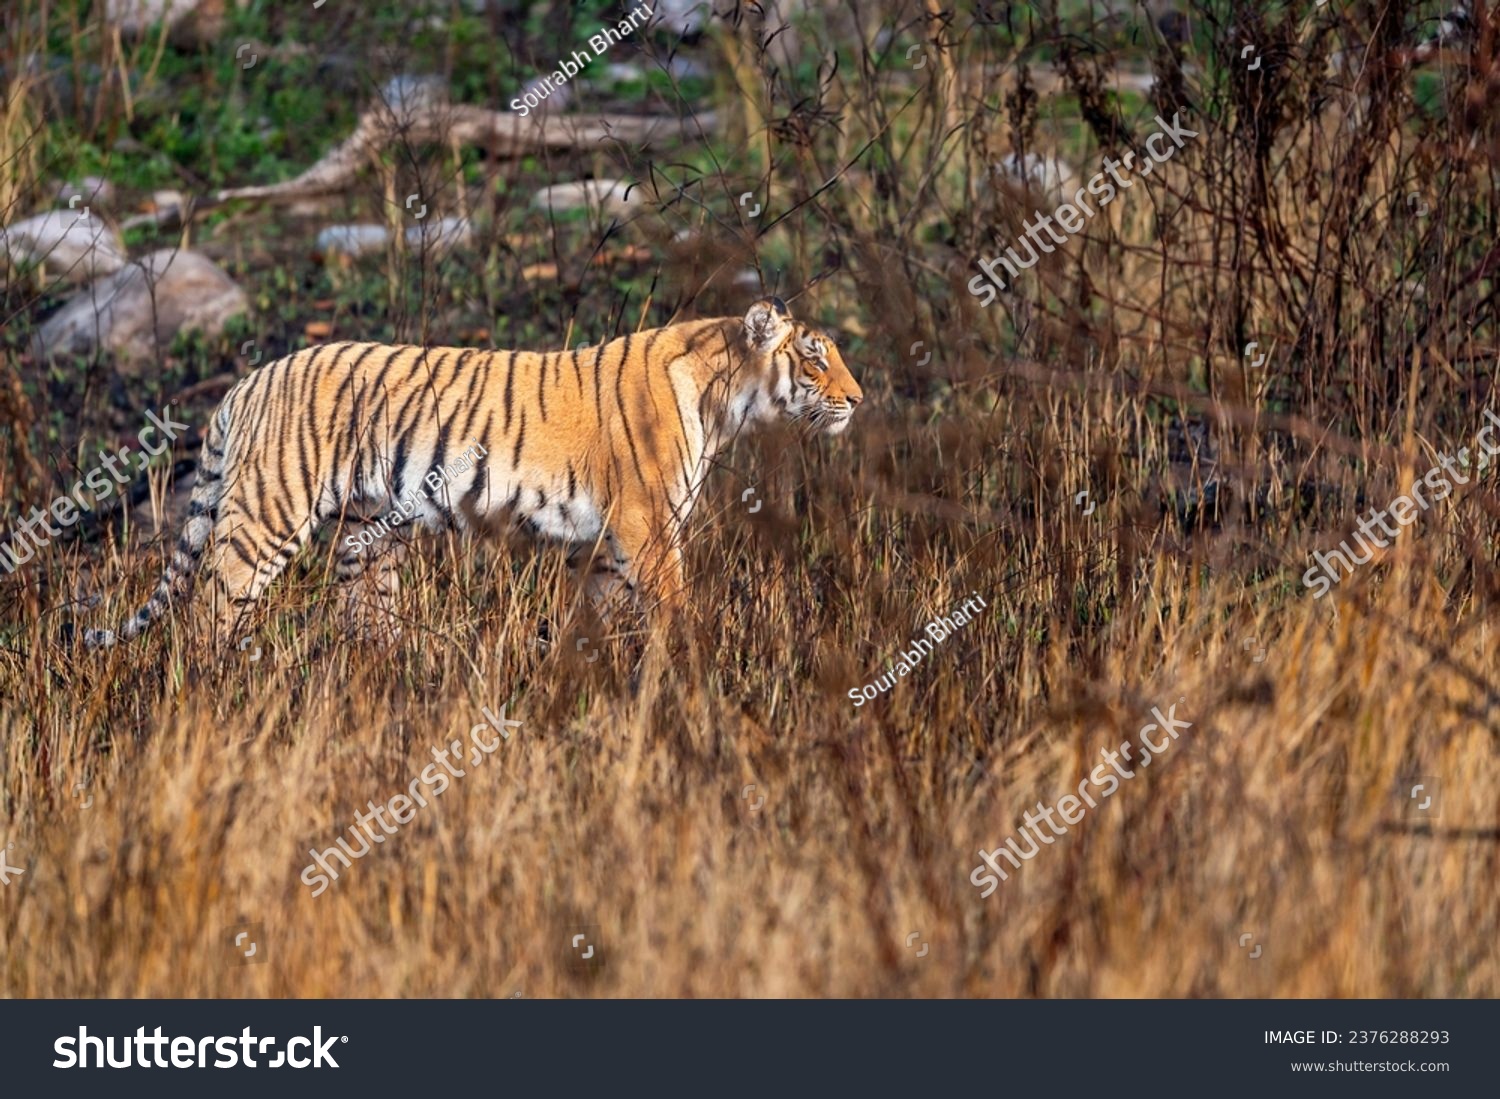 indian wild female tiger or panthera tigris side profile walking or territory stroll prowl terai region forest in natural scenic grassland in day safari at jim corbett national park uttarakhand india #2376288293